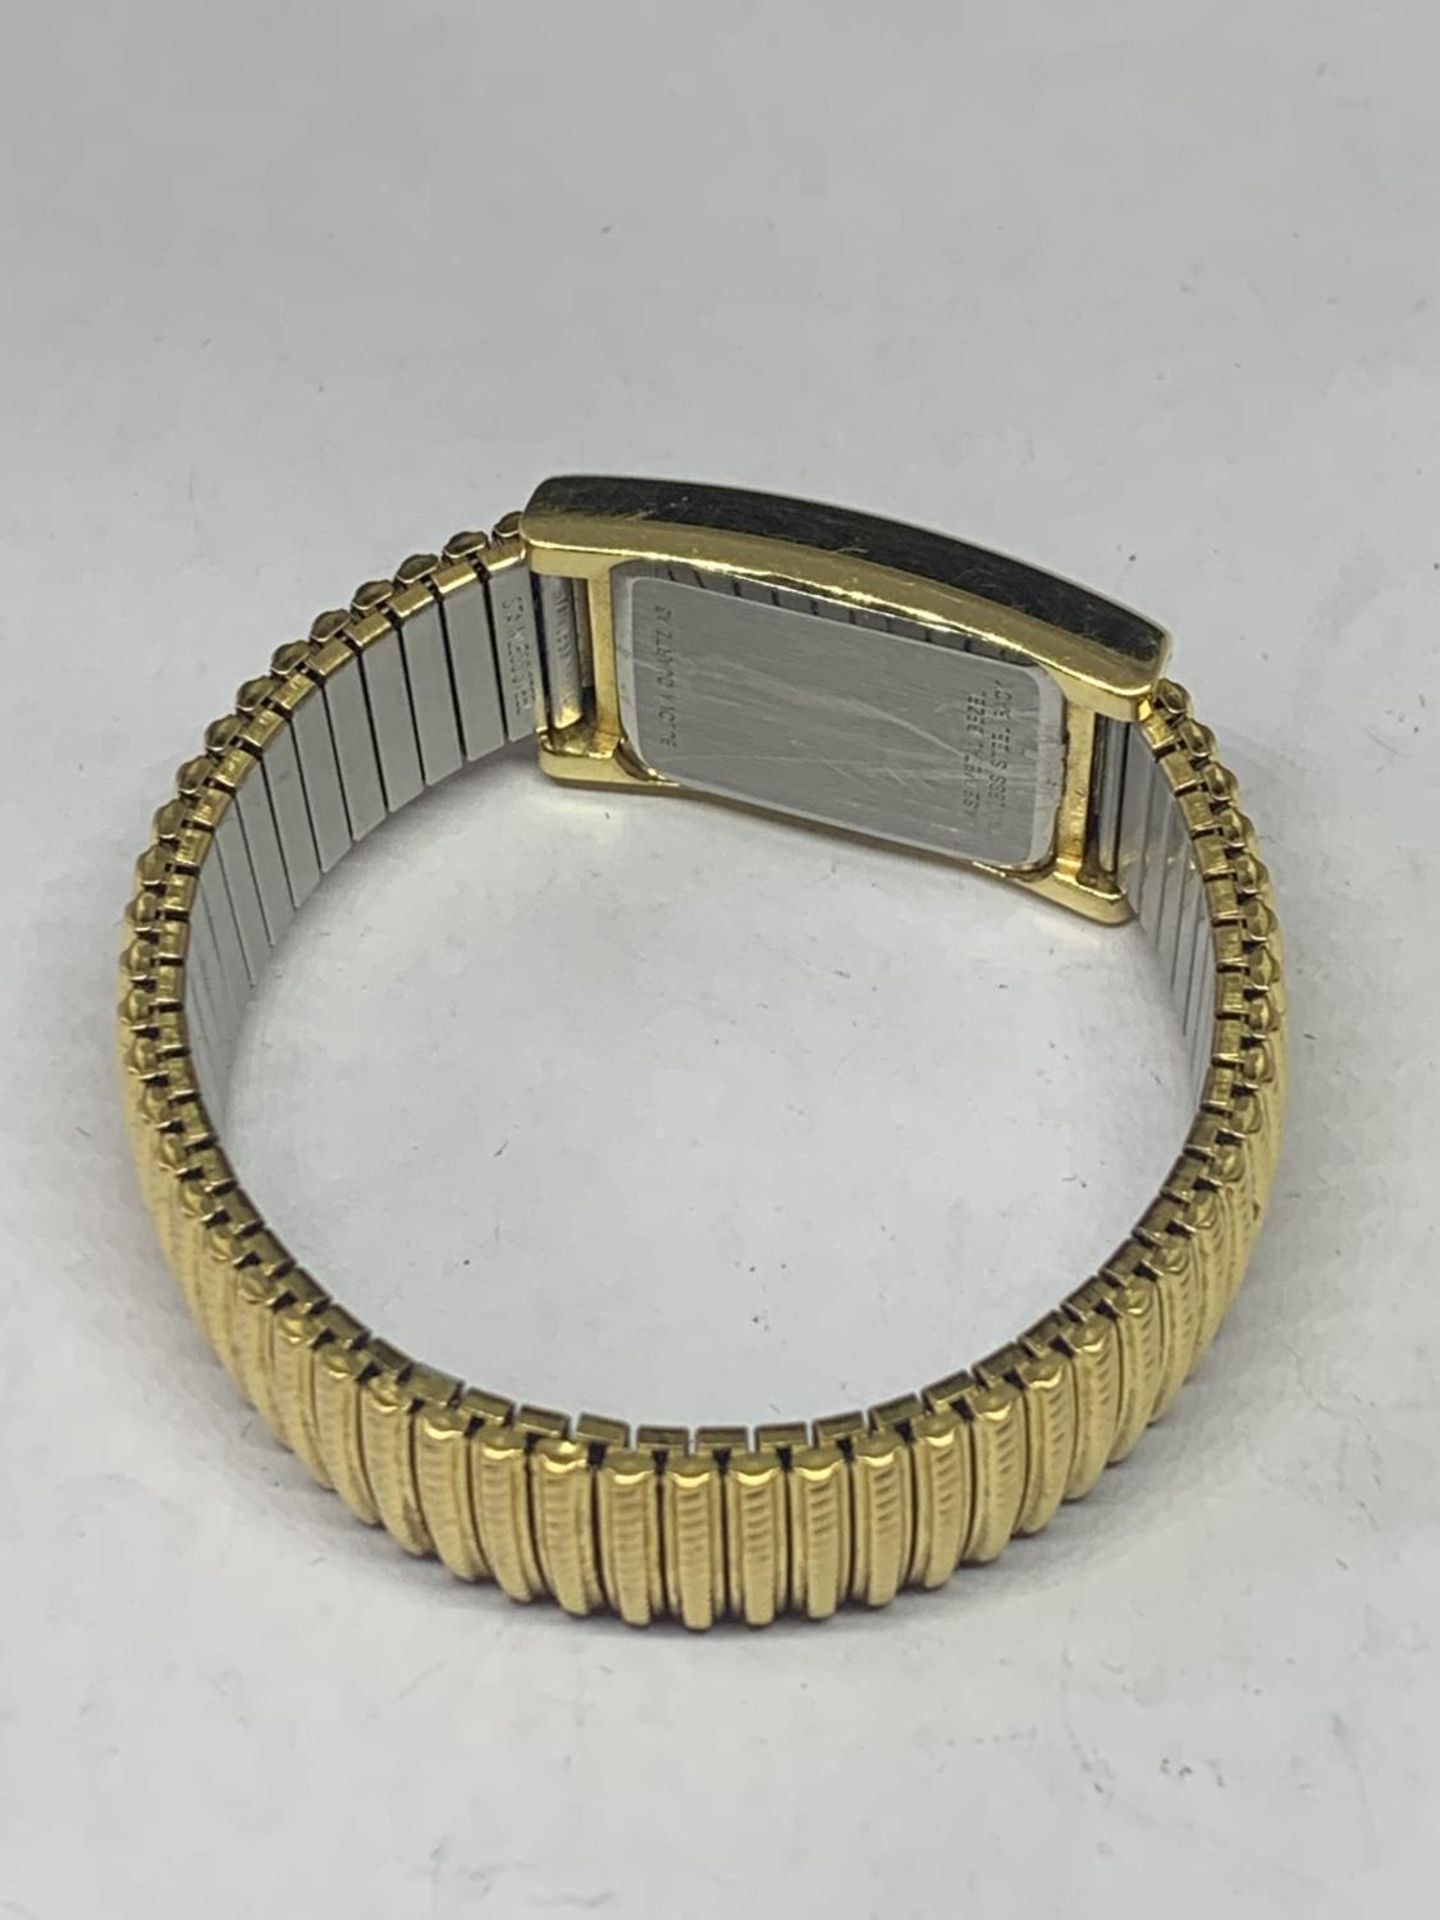 A GOLD PLATED CARAVELLE WRIST WATCH SEEN WORKING BUT NO WARRANTY - Image 3 of 3